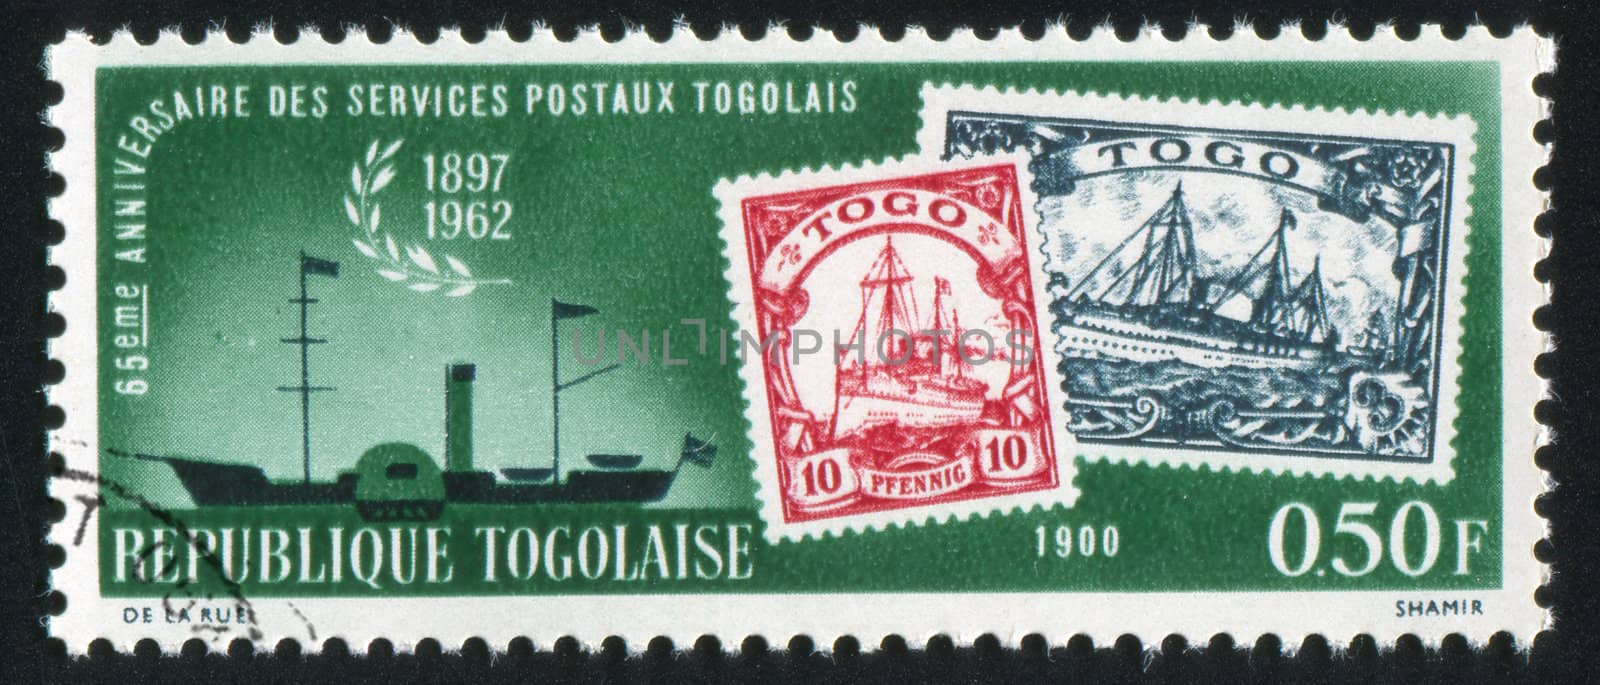 TOGO - CIRCA 1963: stamp printed by Togo, shows Mail ship, stamps of 1900, circa 1963